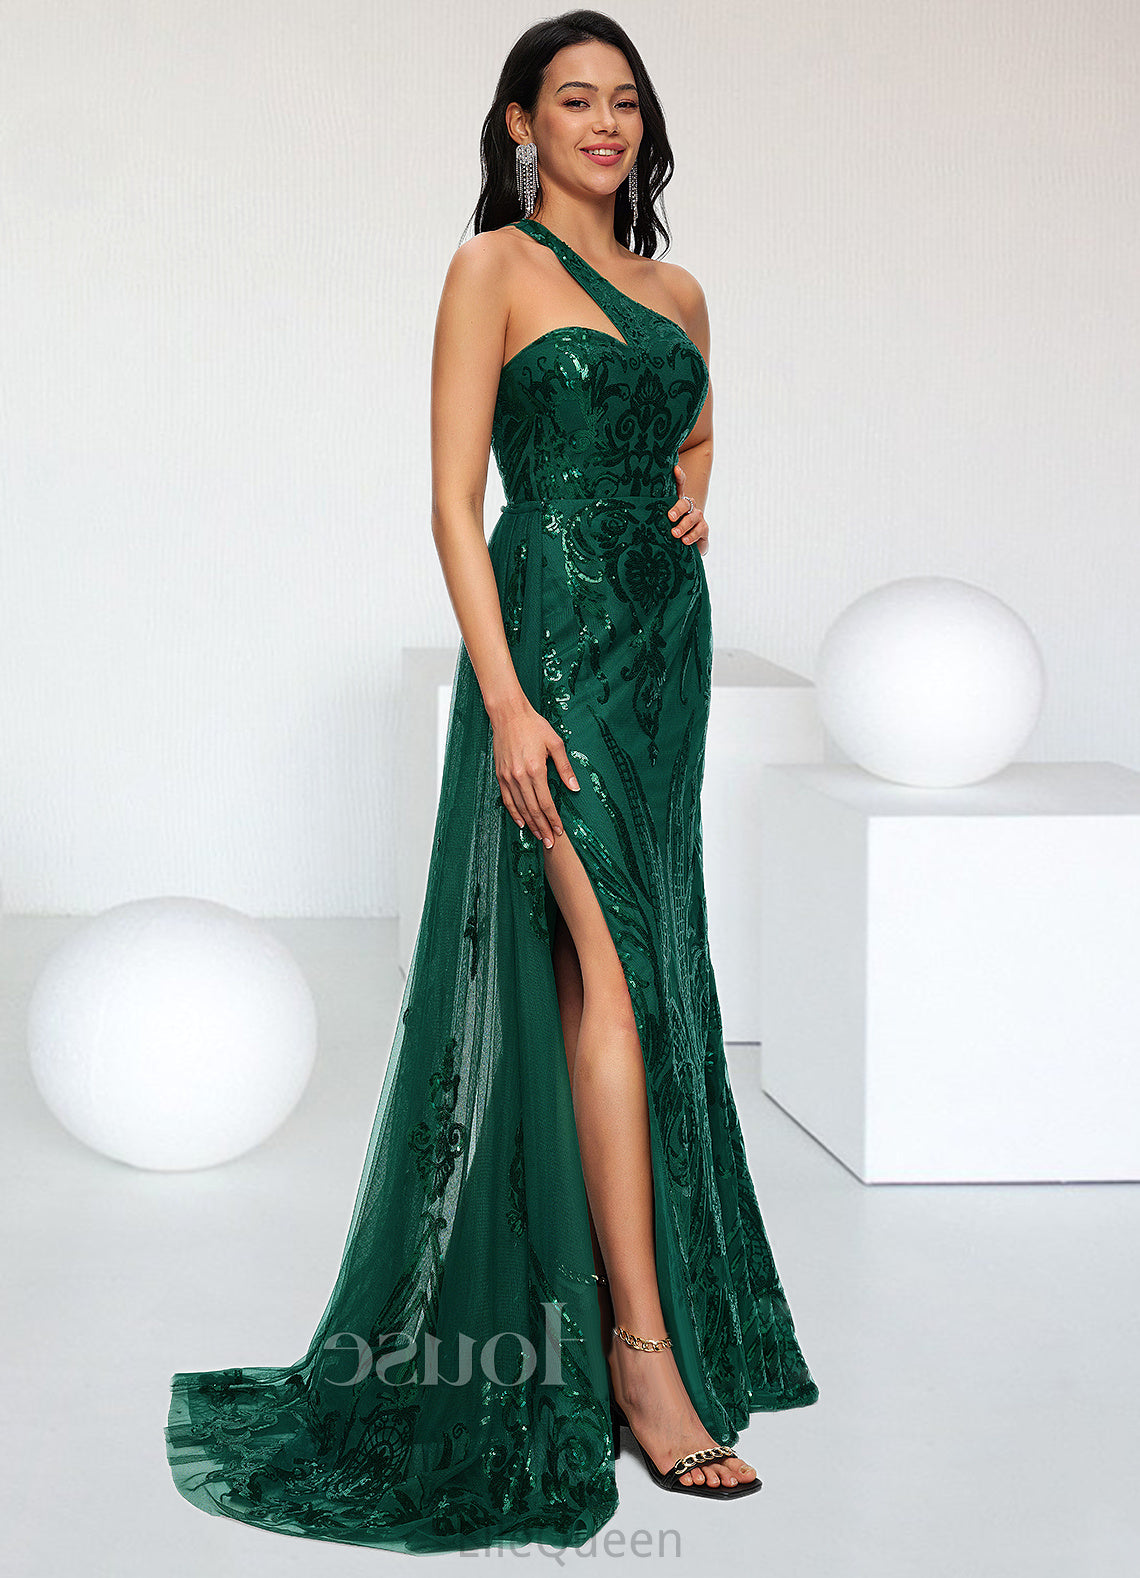 Kiana Trumpet/Mermaid One Shoulder Sweep Train Sequin Prom Dresses With Sequins DGP0022226